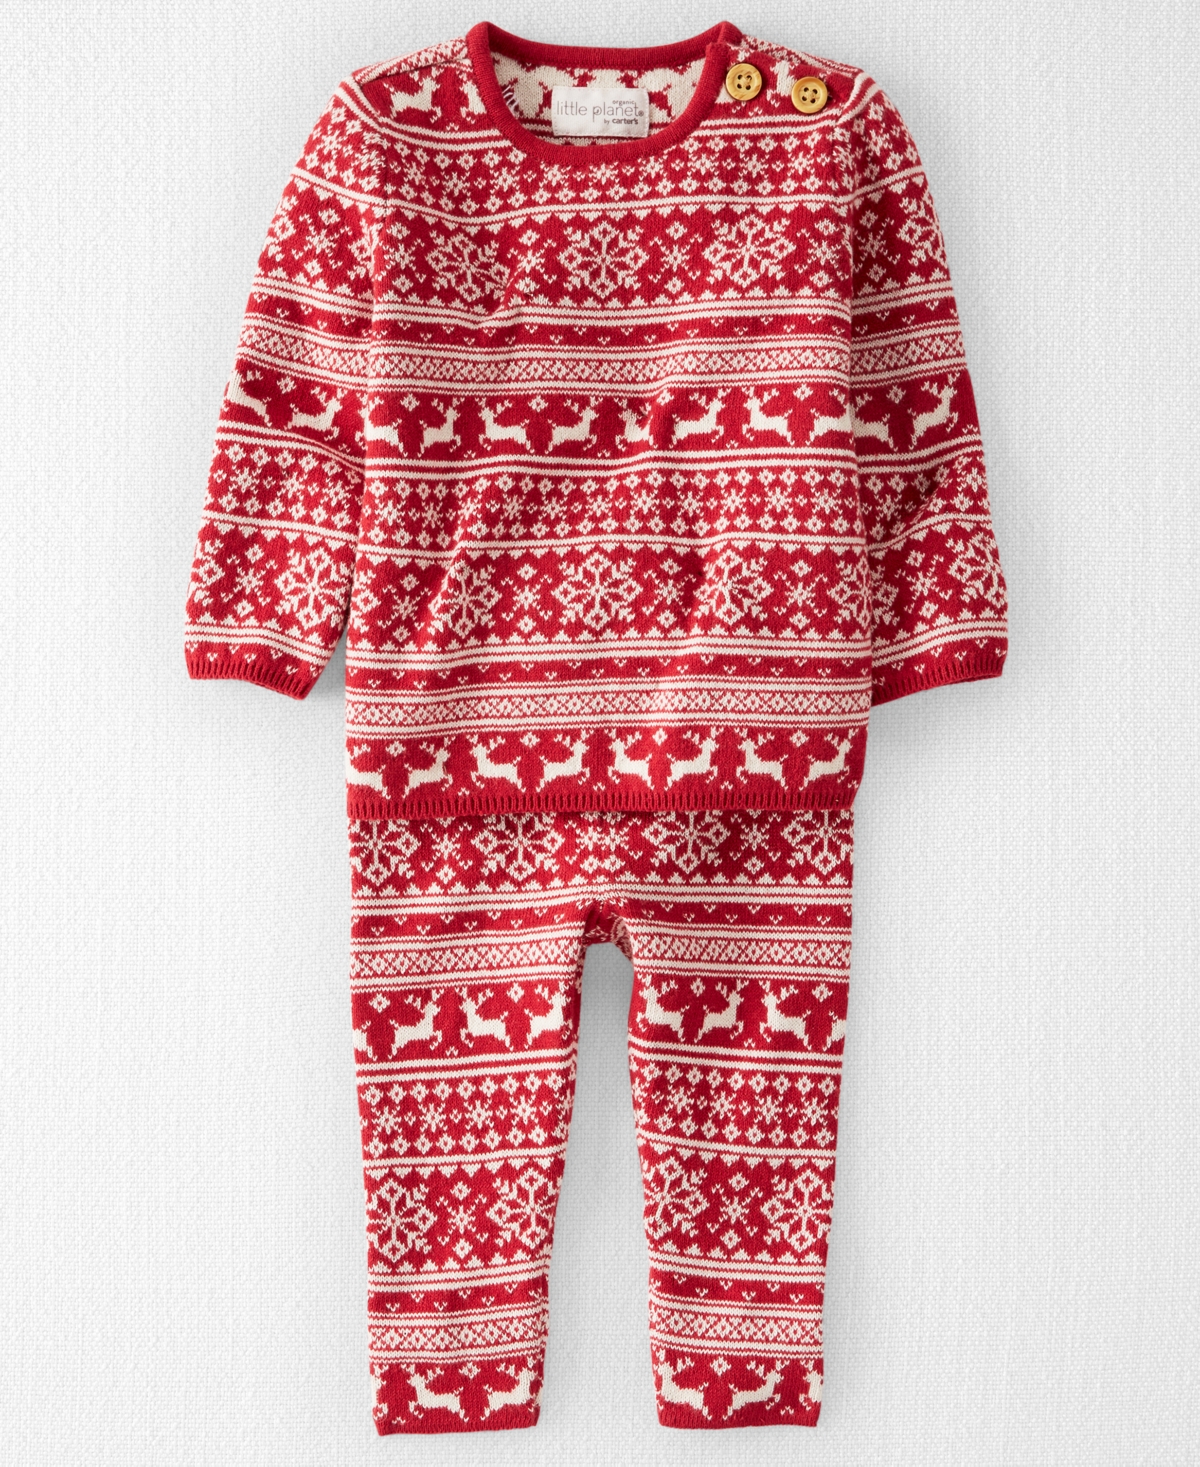 Carter's Little Planet By  Baby Boys Or Baby Girls Organic Fair Isle Sweater And Pants, 2 Piece Set In Red